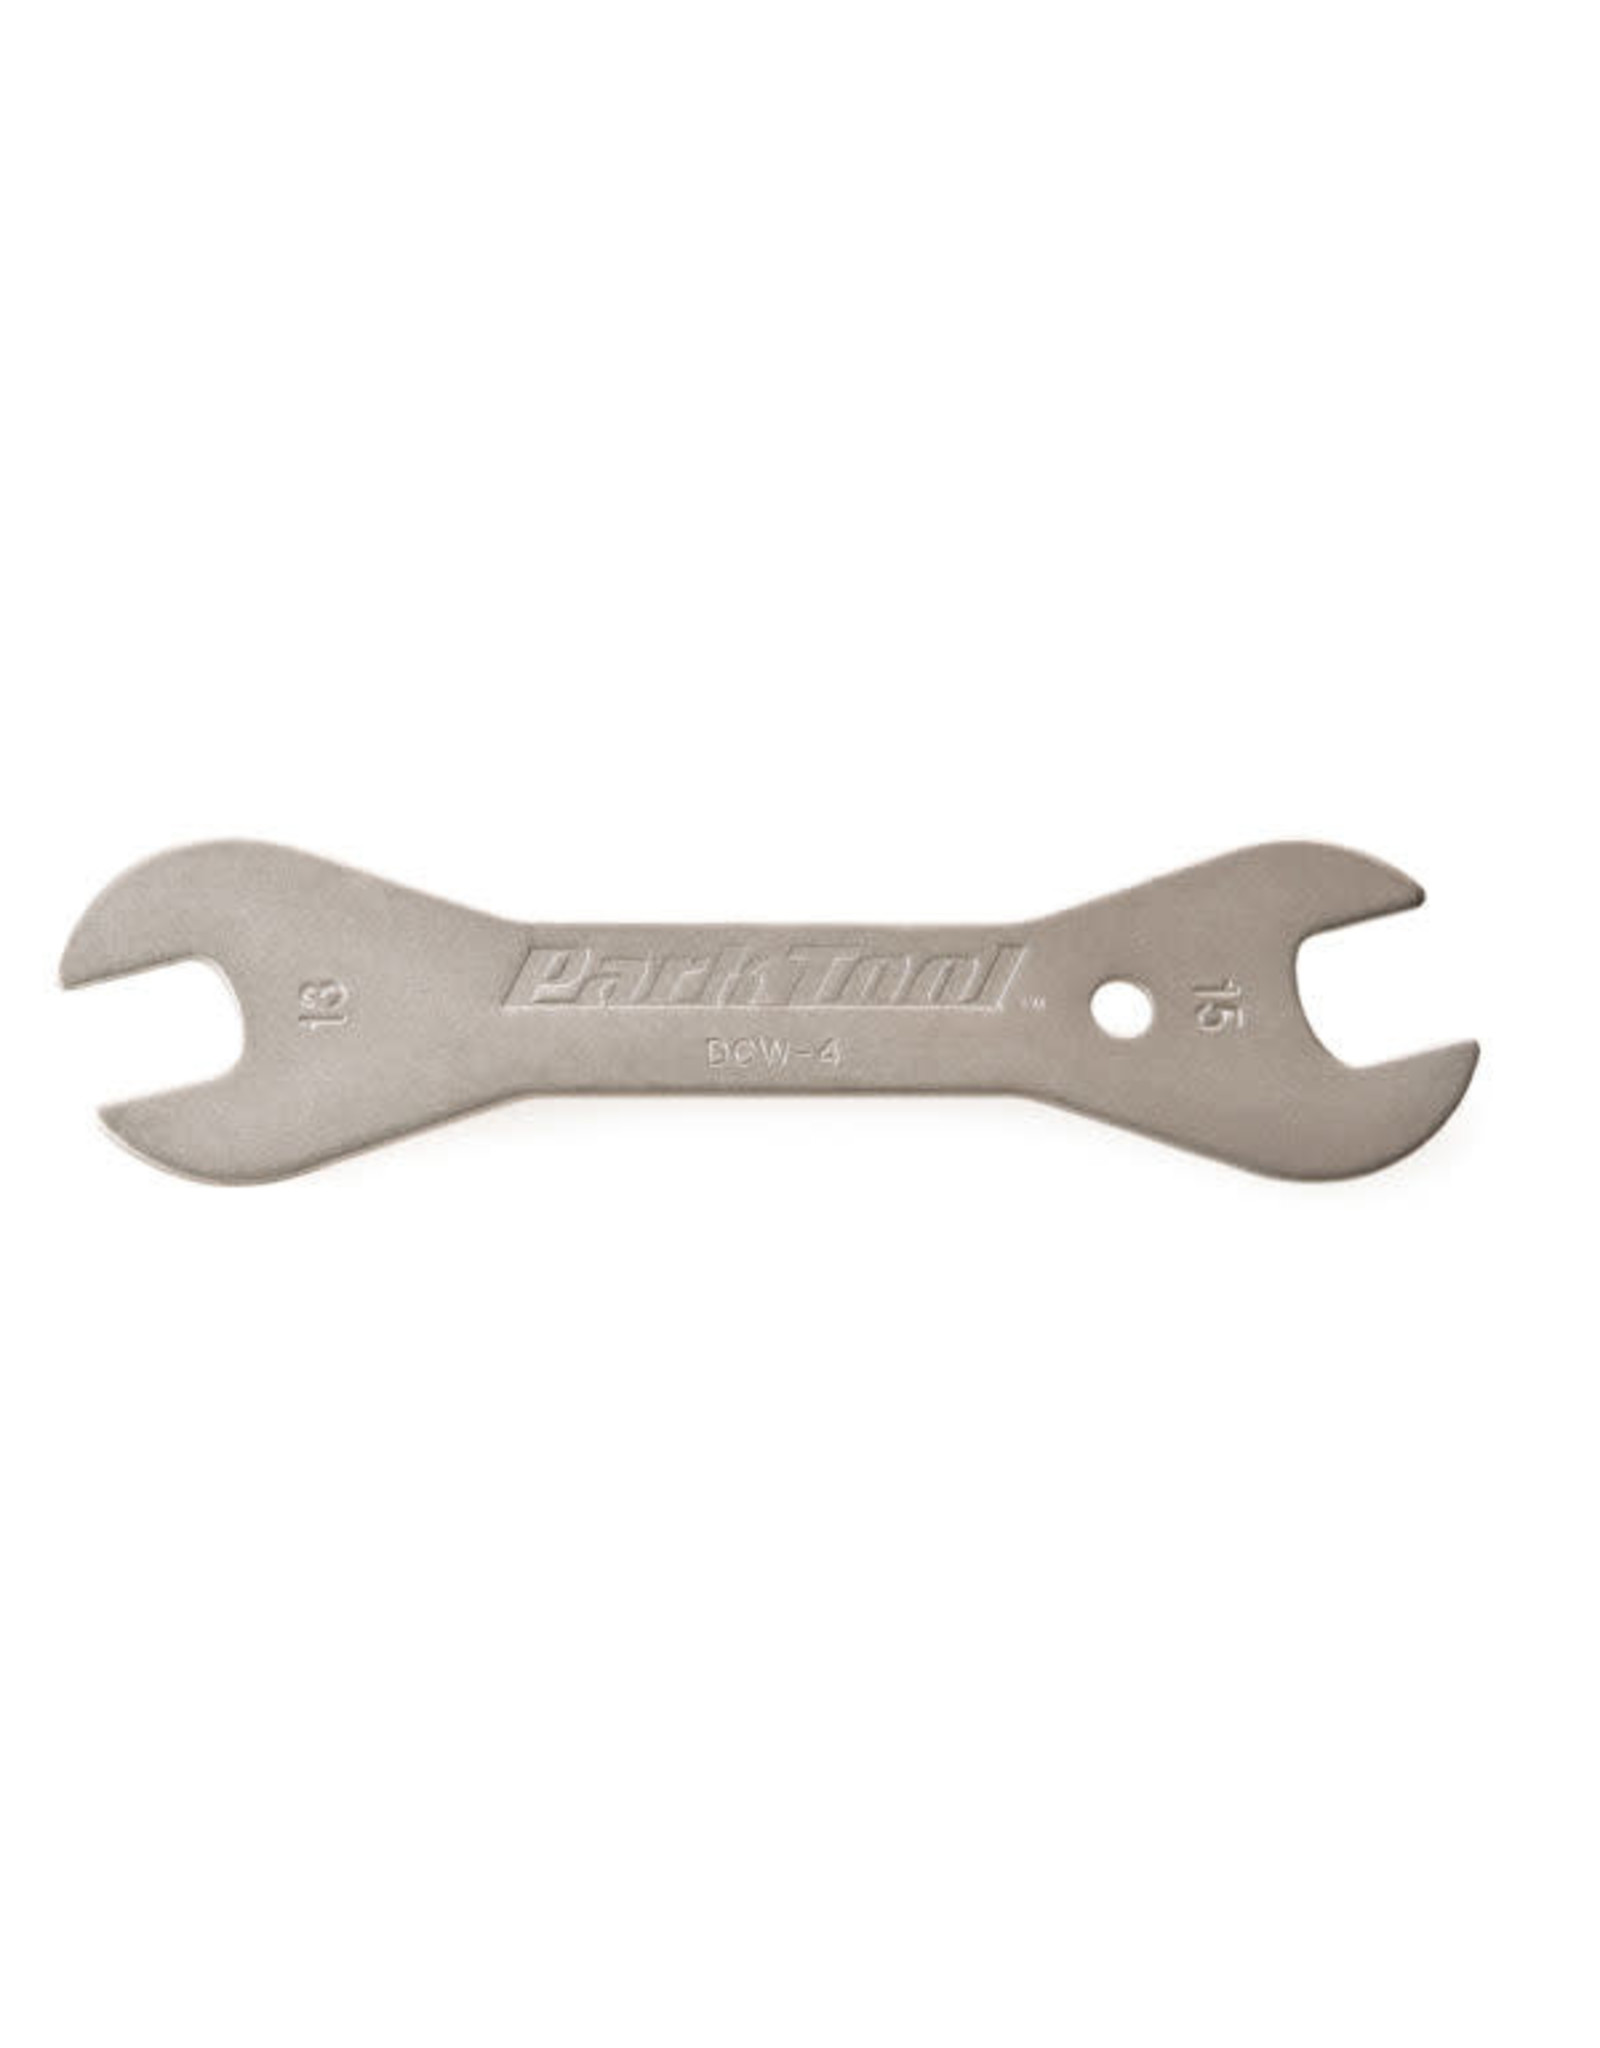 Park Tool Park Tool DCW-4 Double-Ended Cone Wrench: 13.0mm and 15.0mm